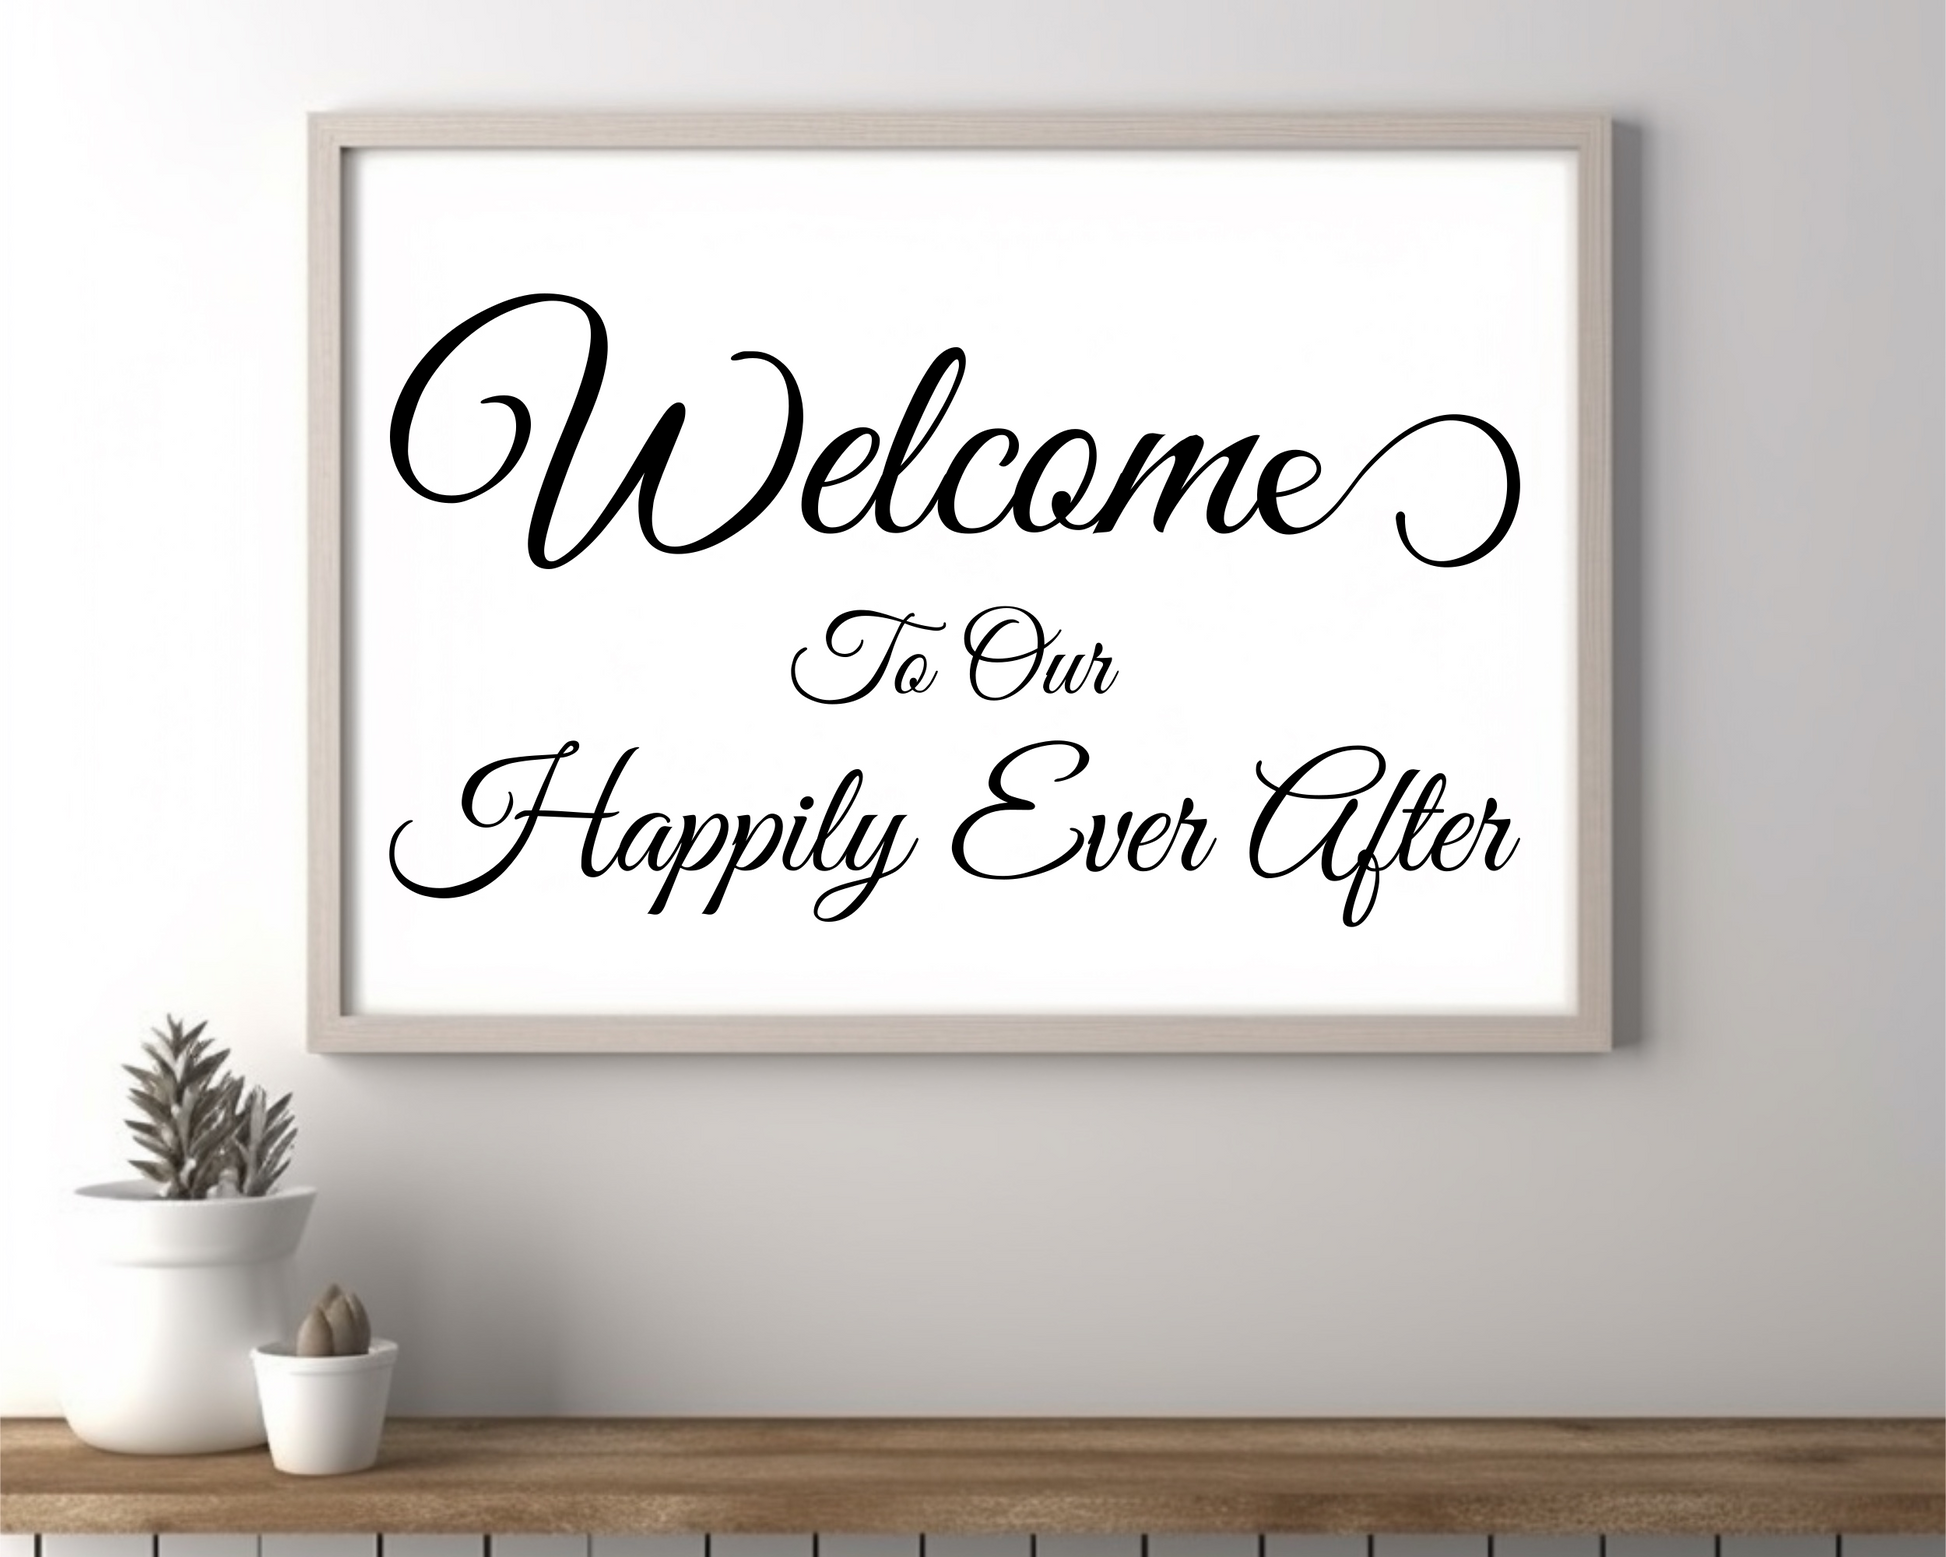 Welcome happily ever after wedding decal